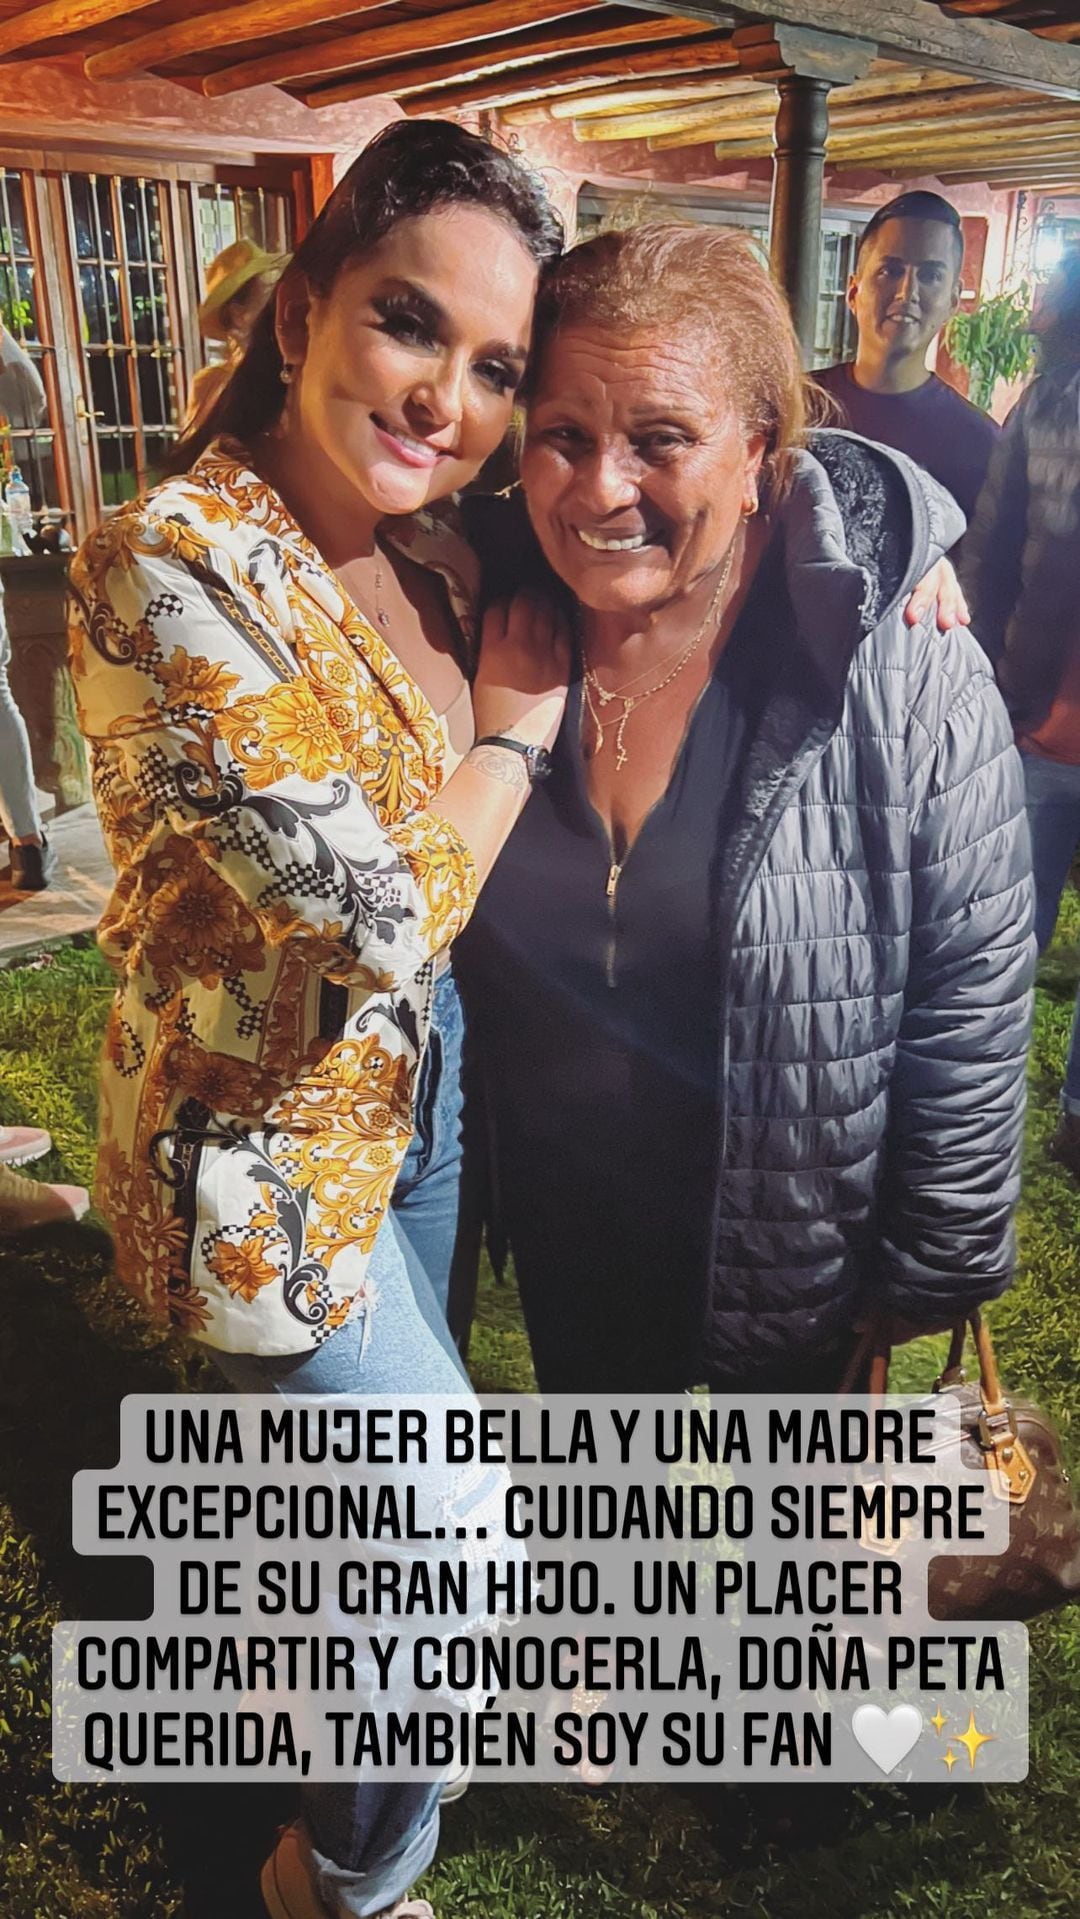 Daniela Darcourt, a fan of Doña Peta: “Exceptional mother, always taking care of her great son”